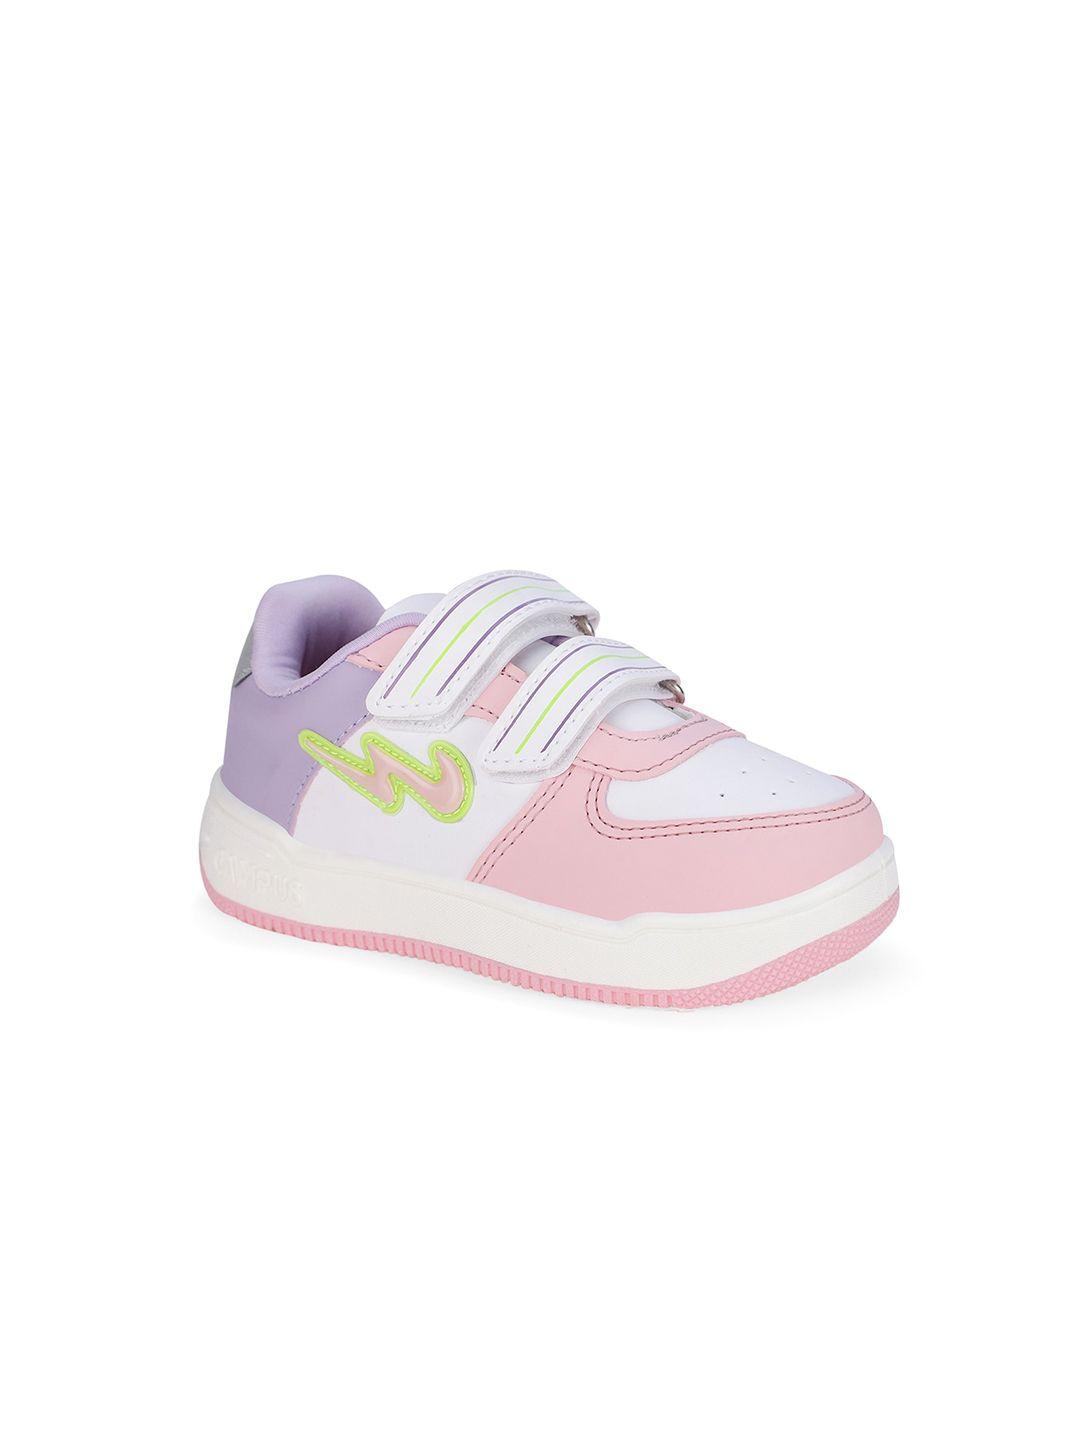 campus unisex kids off white colourblocked sneakers